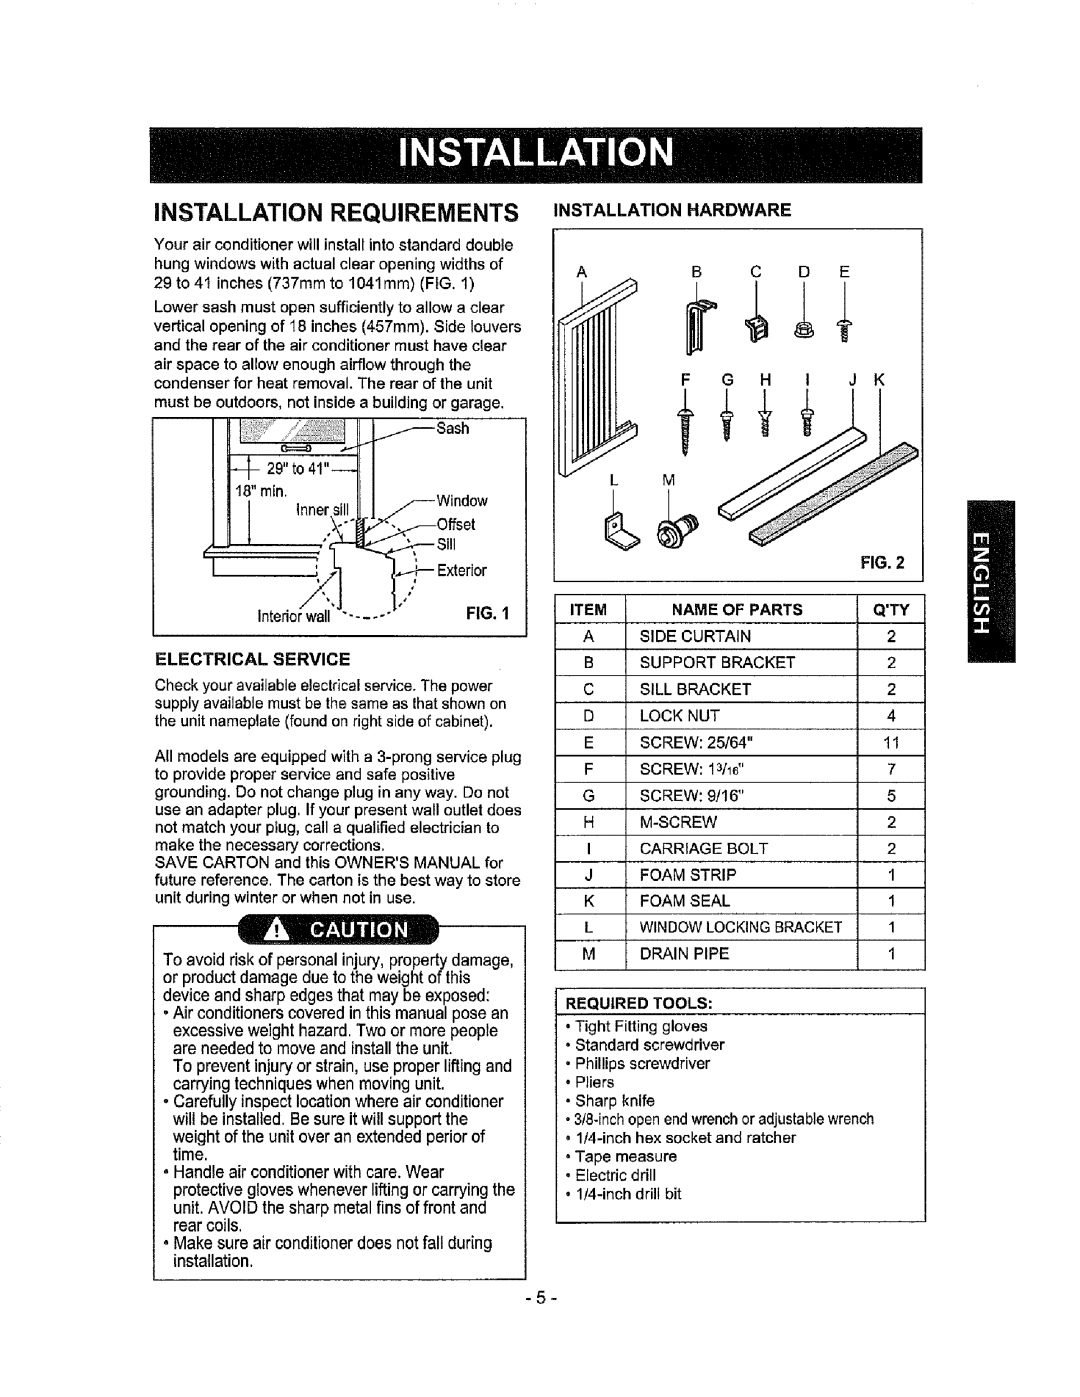 Kenmore 580.72184 owner manual Installation Requirements Installation Hardware, Interiorwall, FIG. t, Electrical Service 